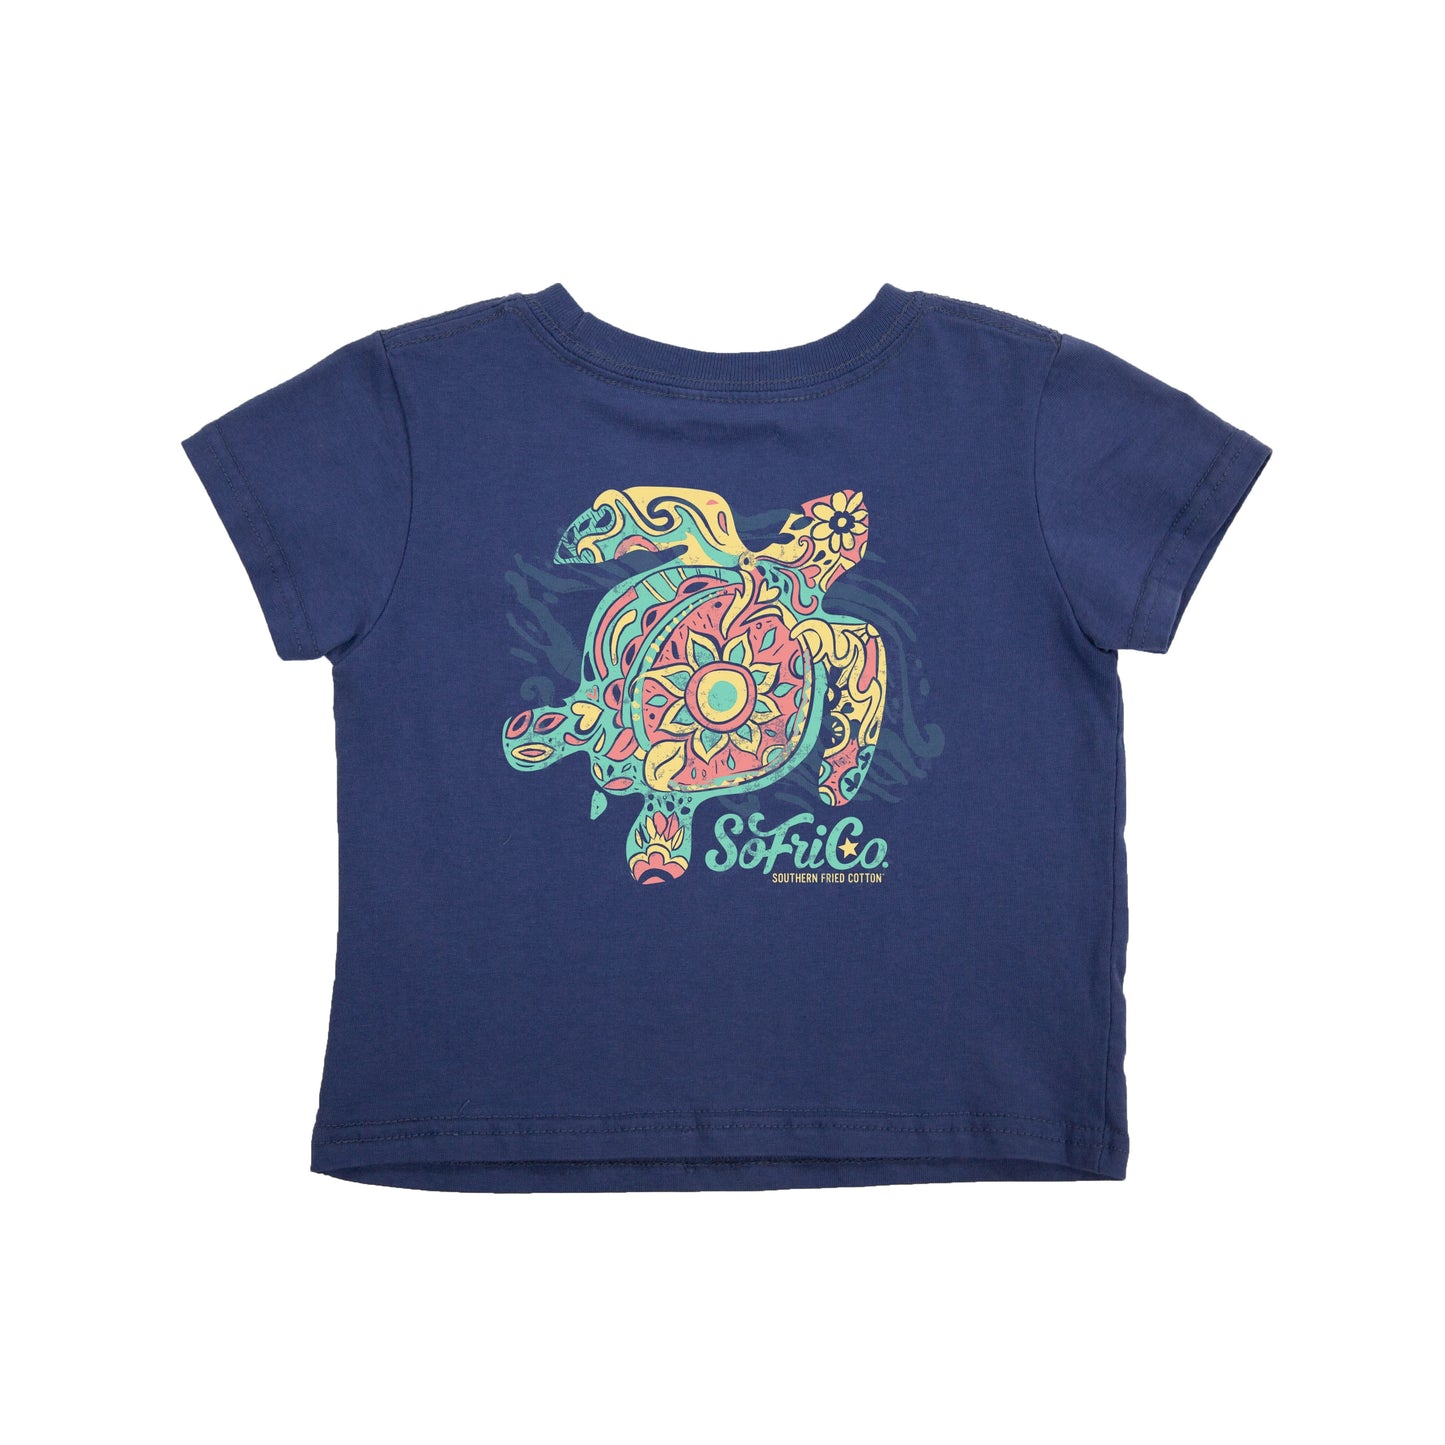 Southern Fried Cotton Children's Toddler Peace Turtle Shirt SFT01611